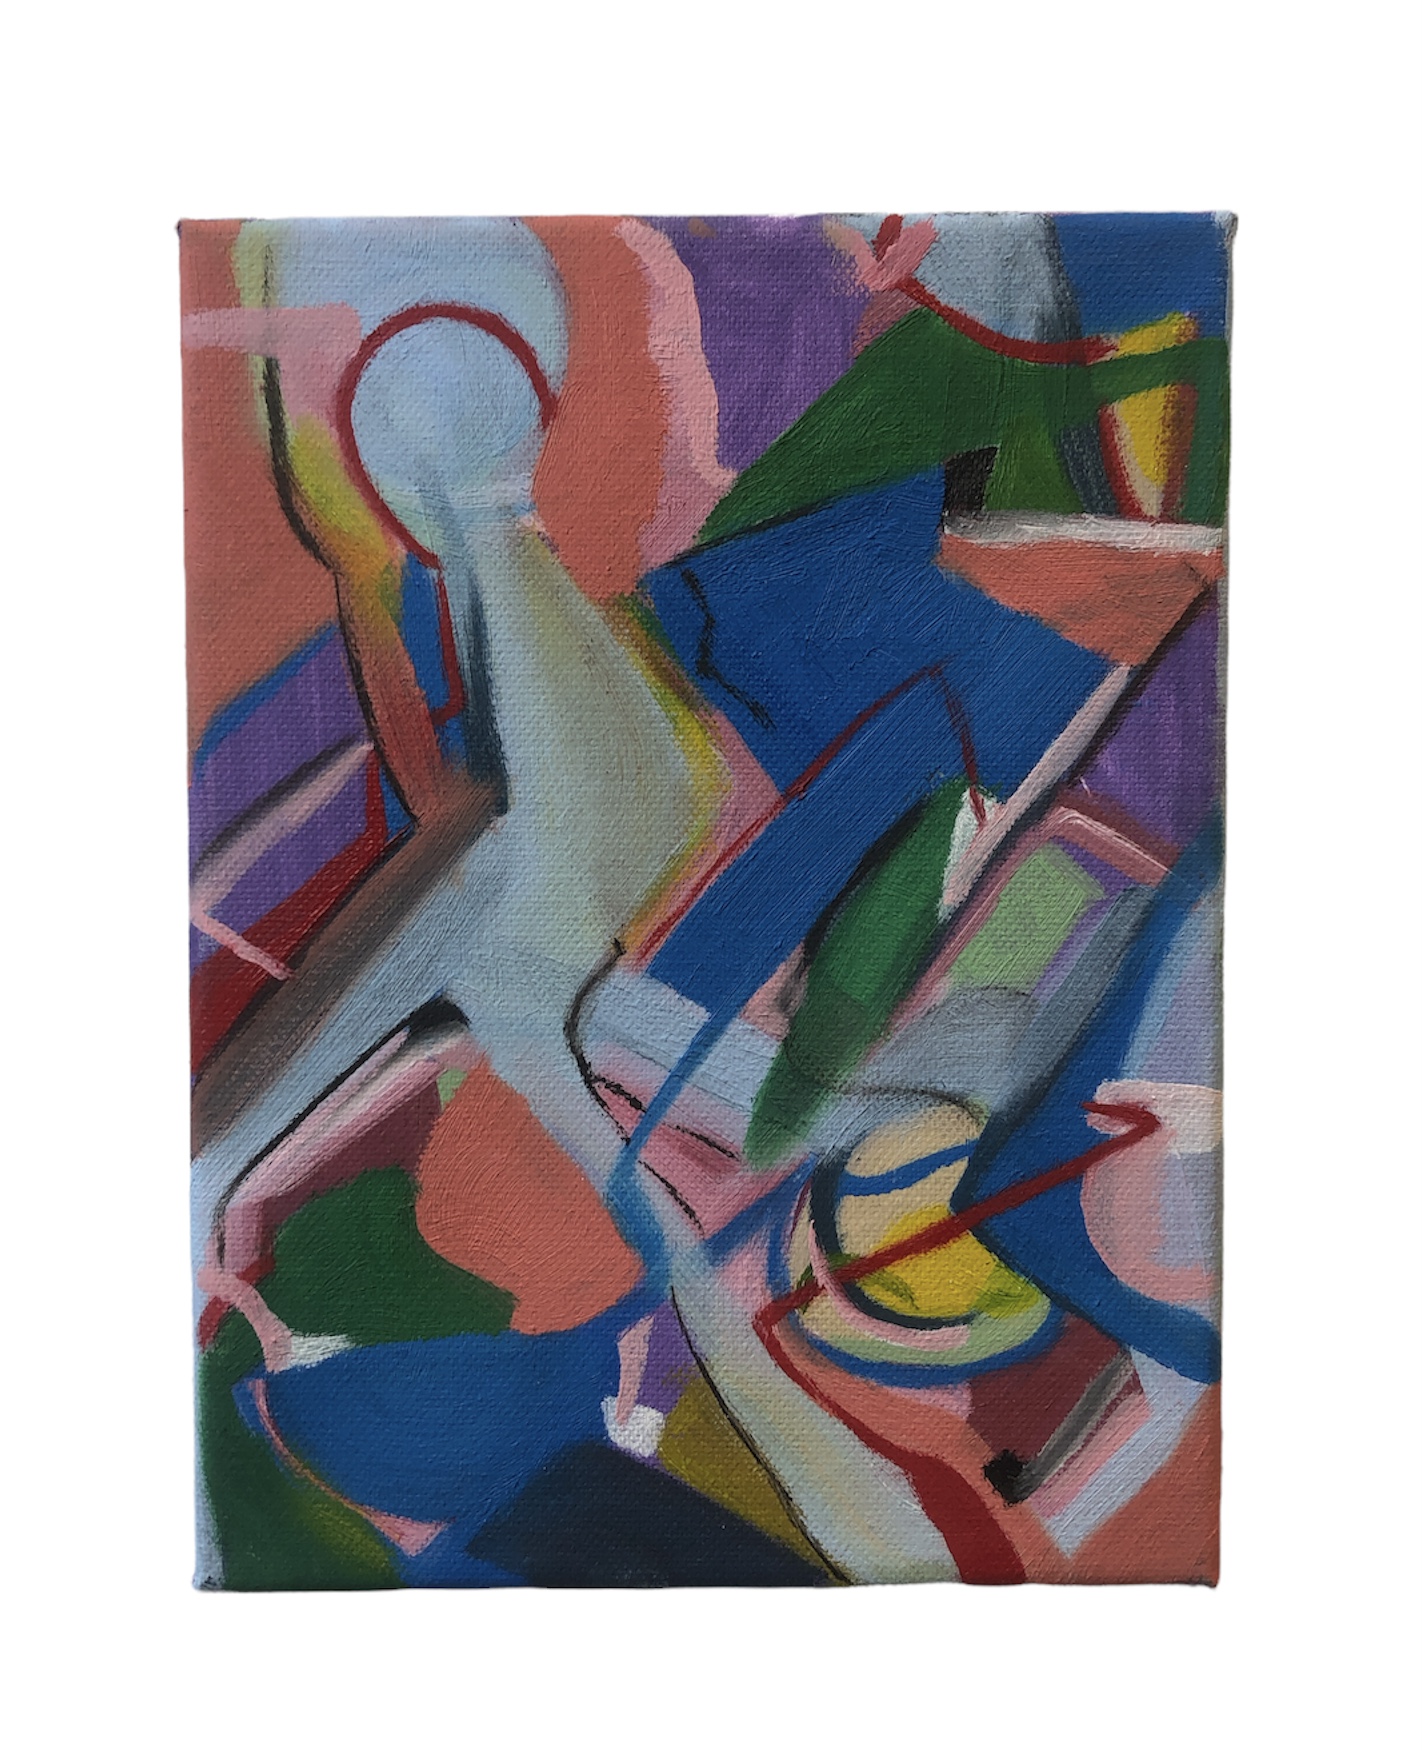 A colourful painting of abstract, Fututist shapes.